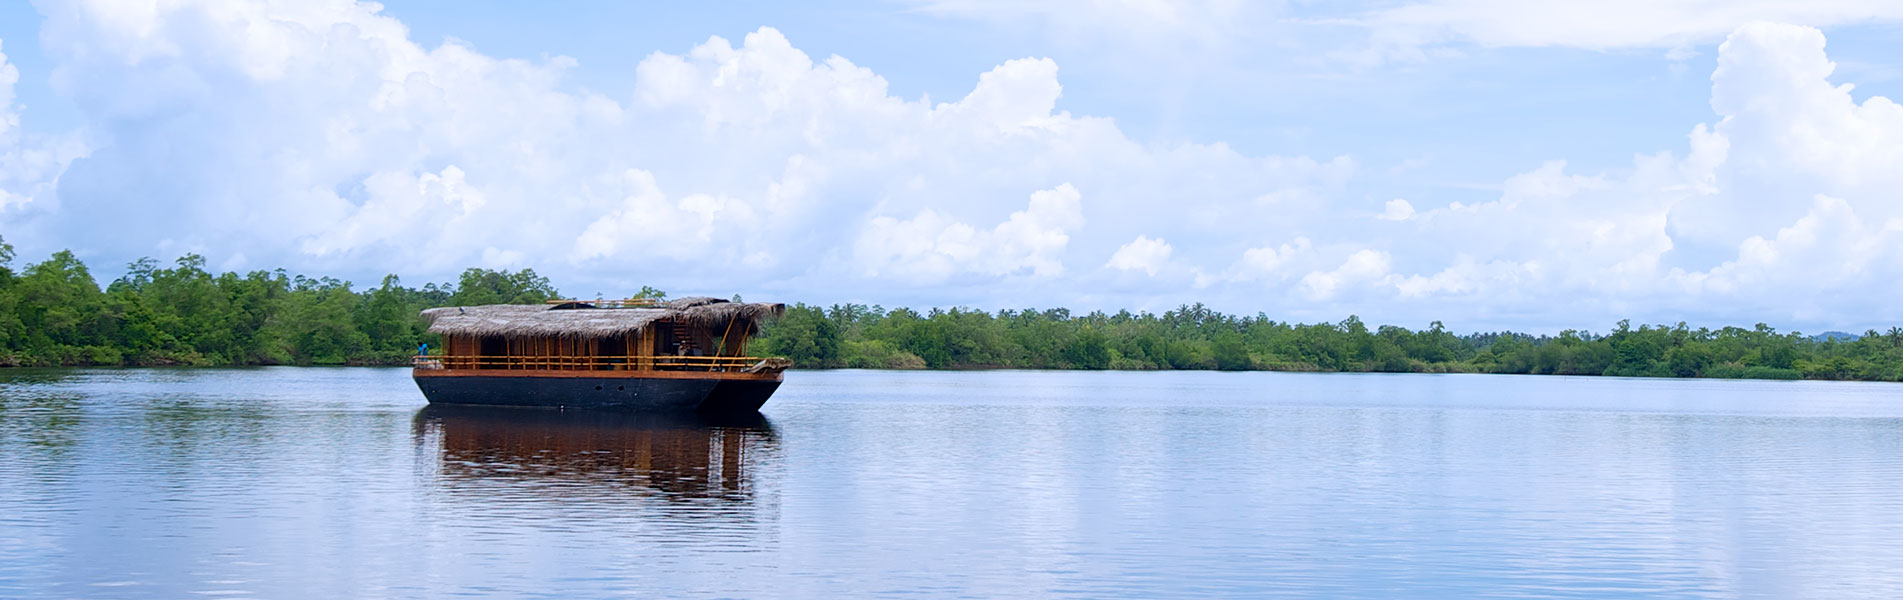 Yathra Houseboat by Jetwing. Houseboat in Sri Lanka